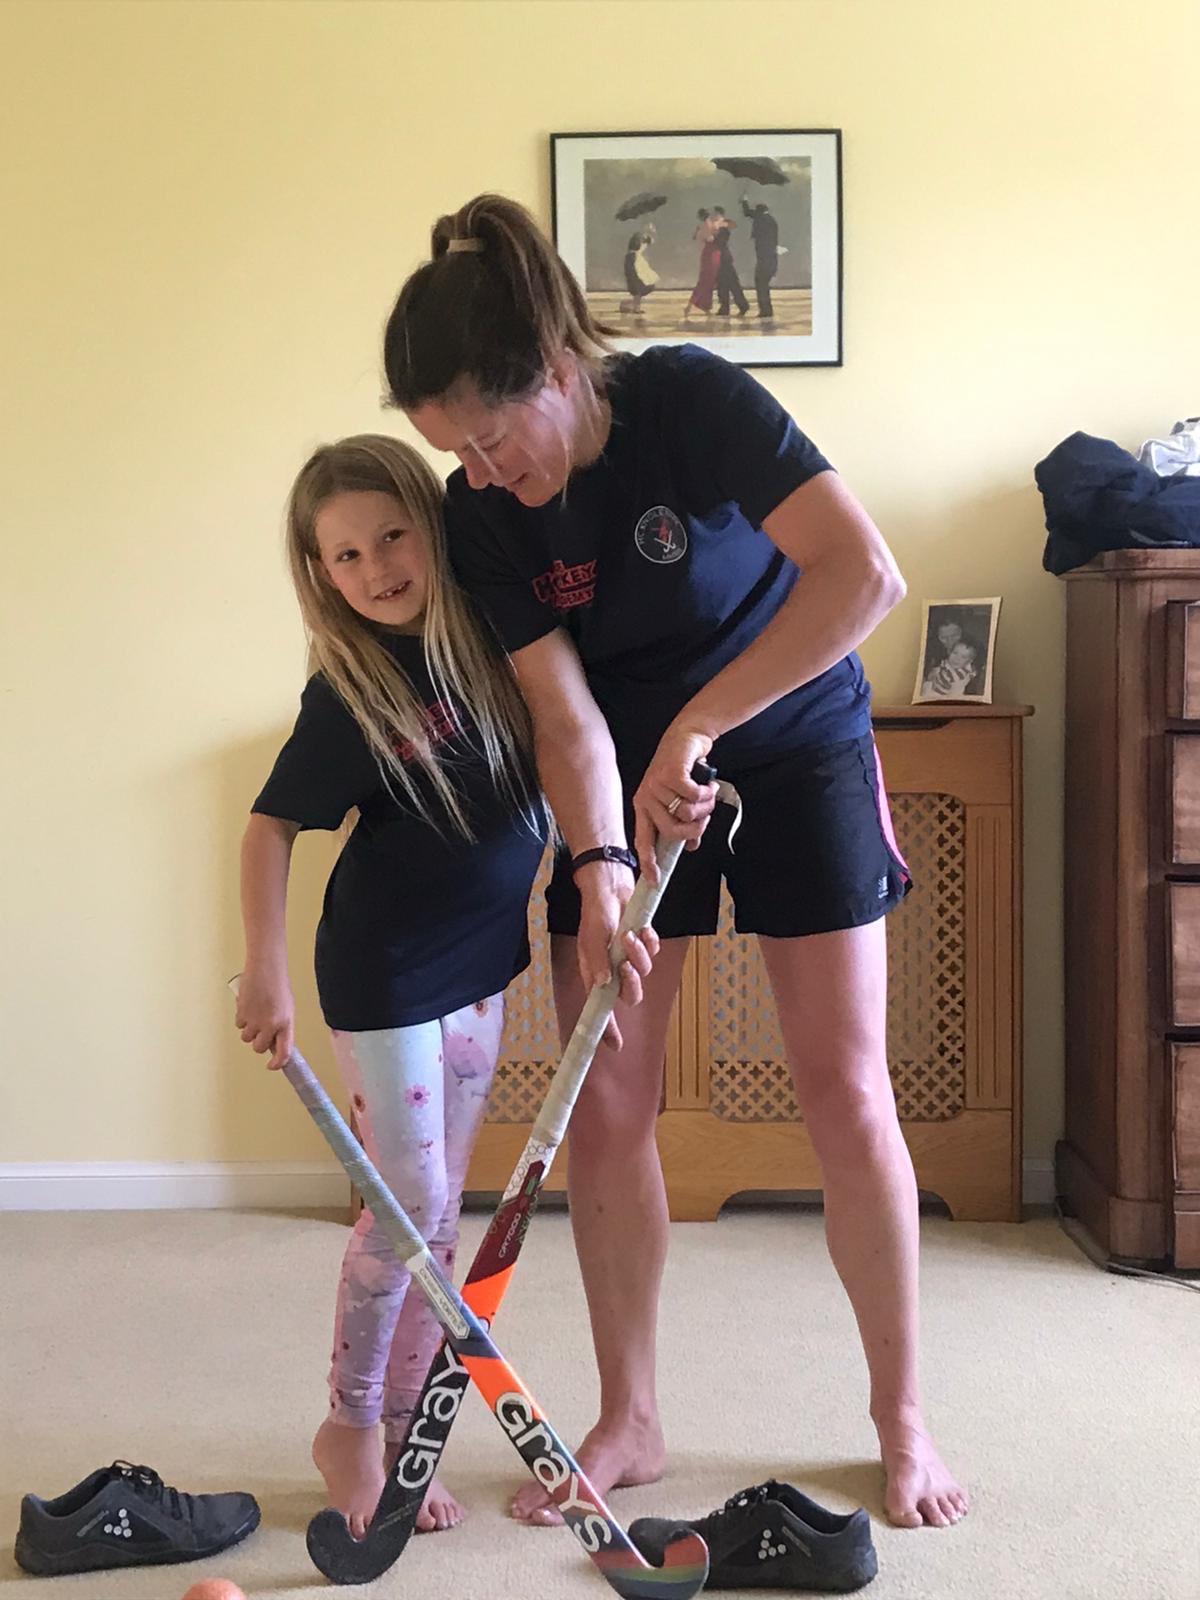 A mother and daughter standing in a living room holding hockey sticks diagonally across each other to form a X shape.